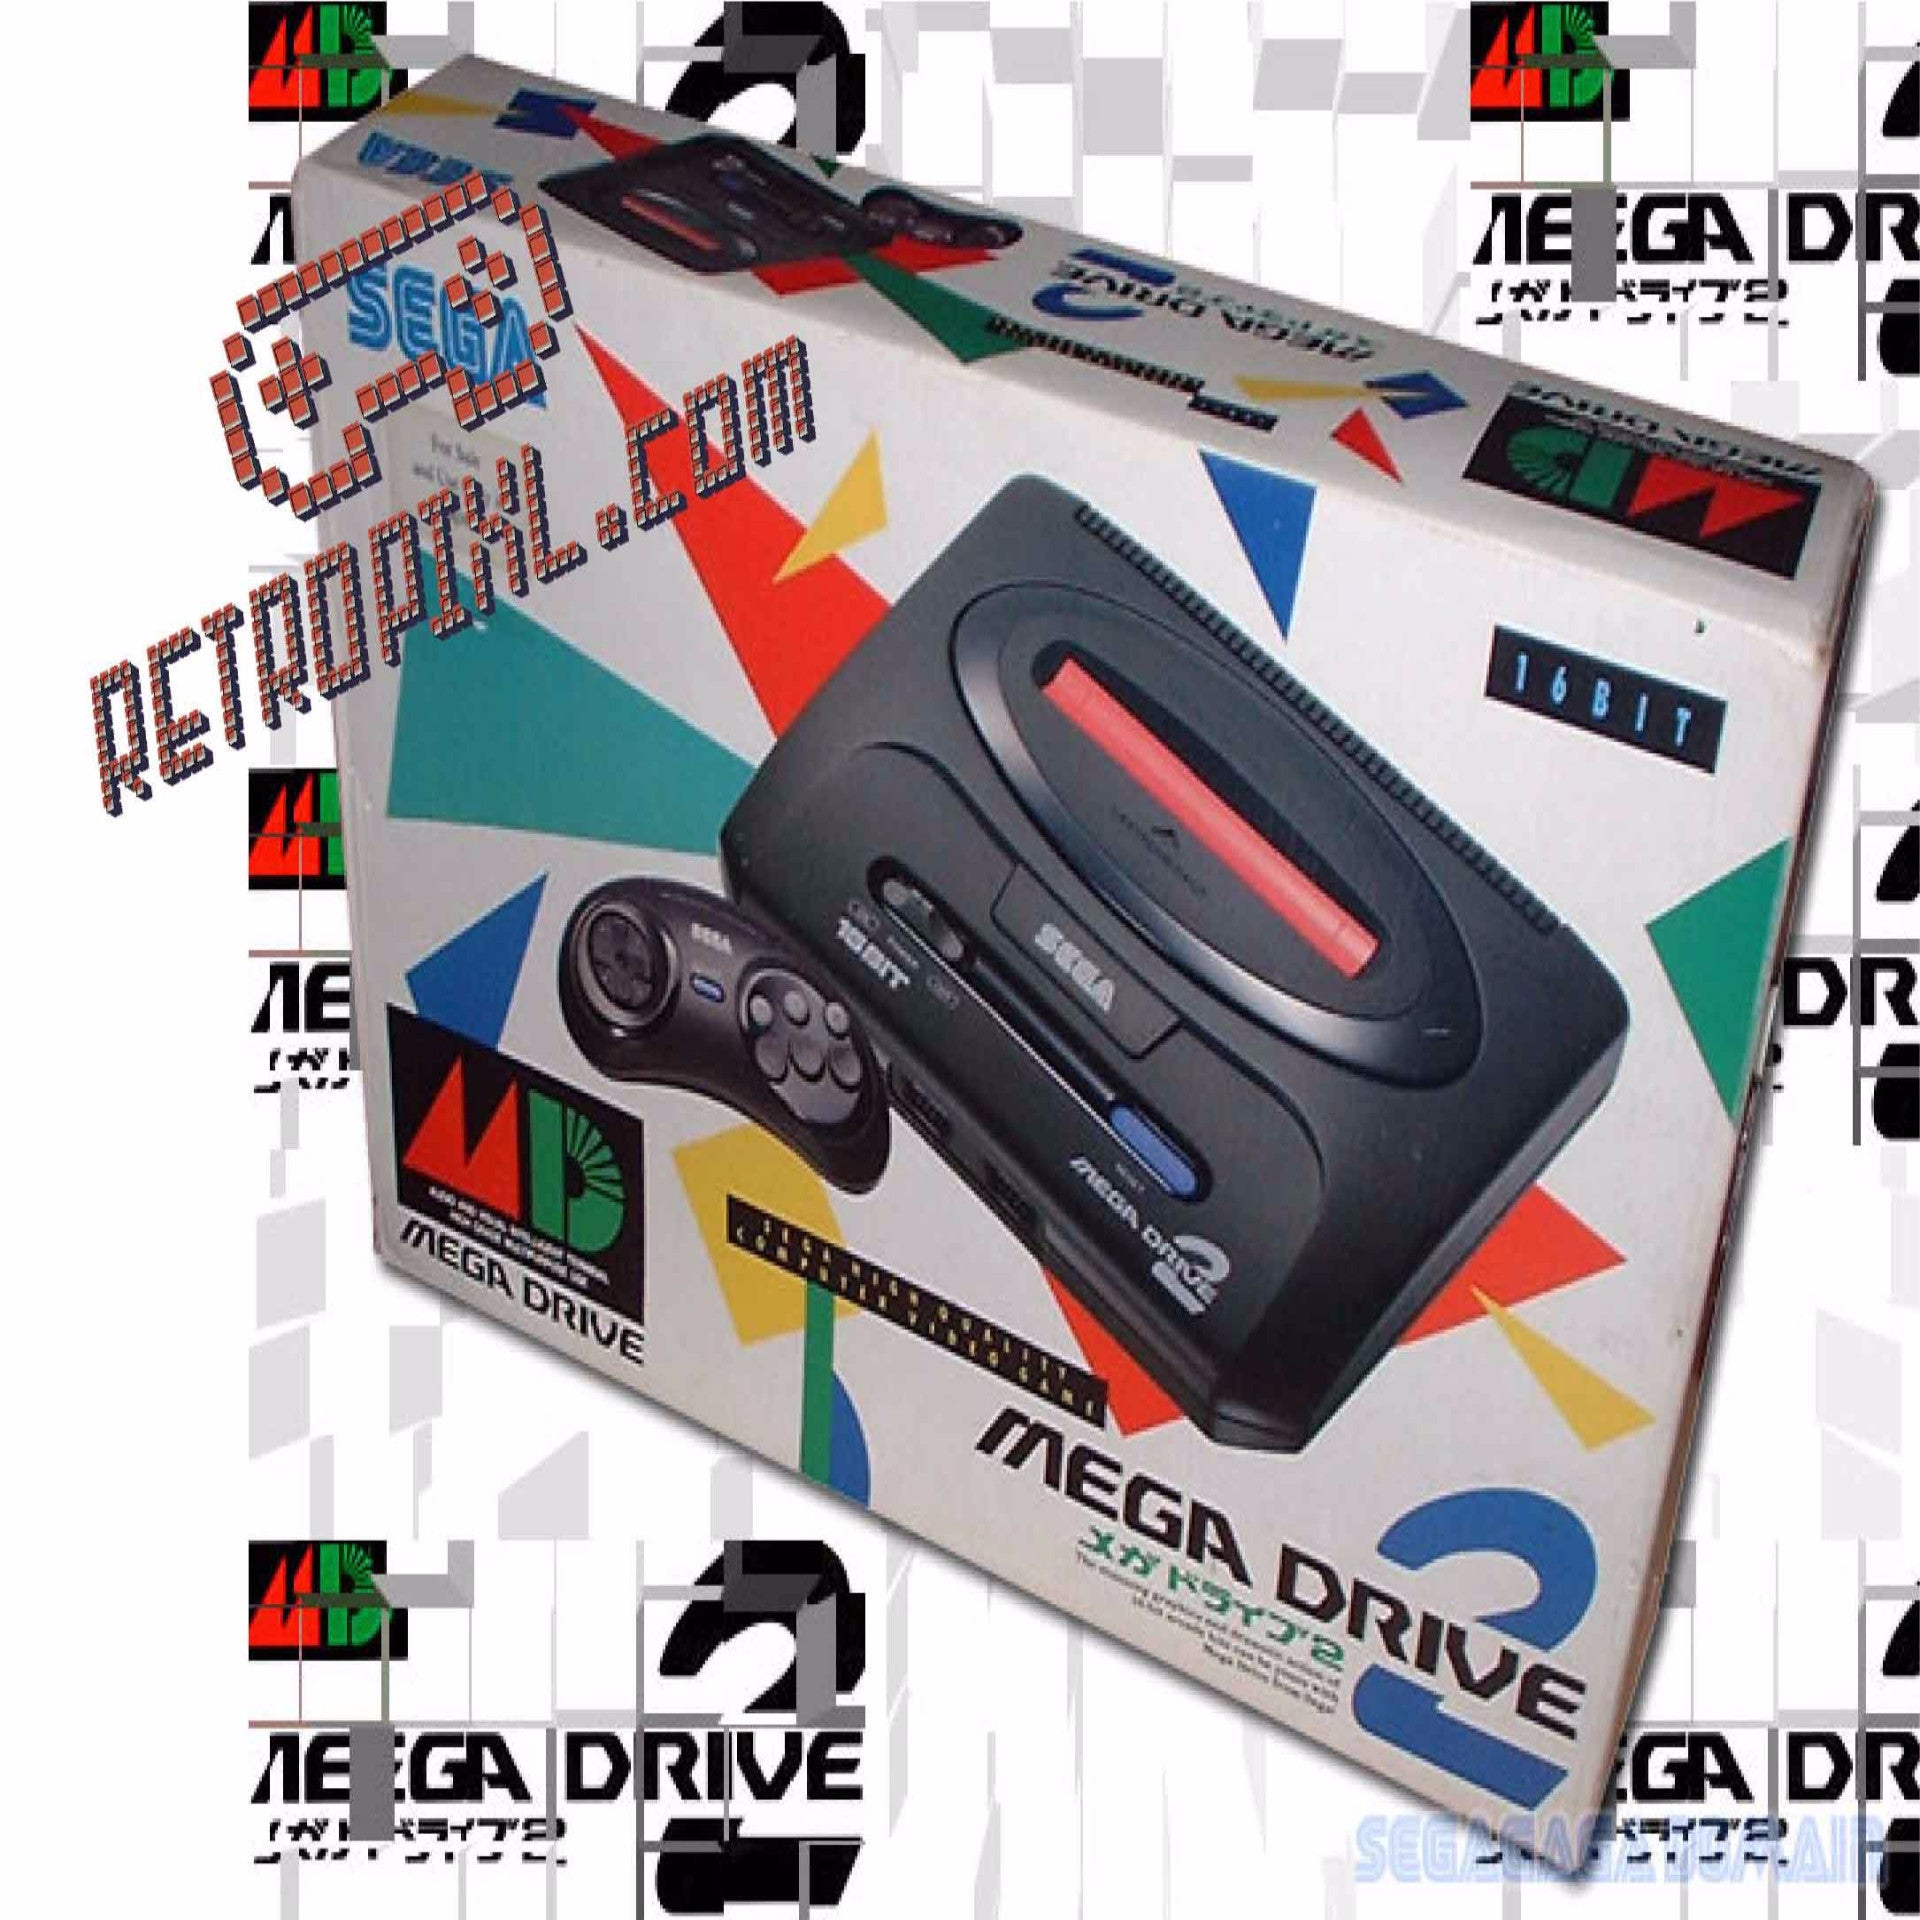 Sonic the Hedgehog 2 Mega Drive/Genesis System – What's it all about?, Reviews#